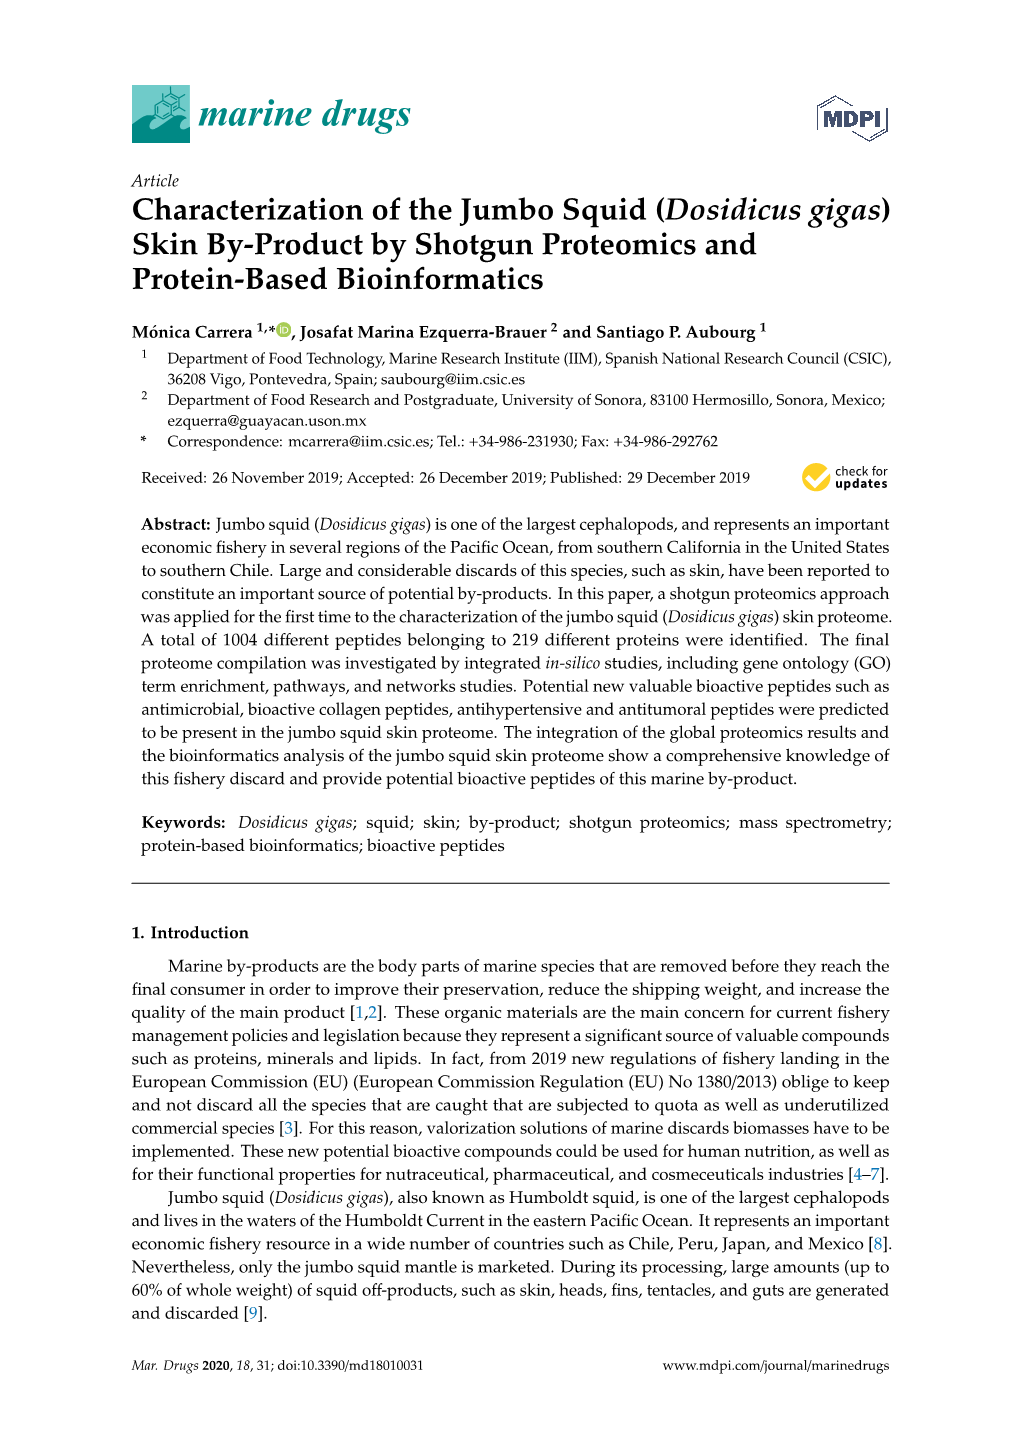 Characterization of the Jumbo Squid (Dosidicus Gigas) Skin By-Product by Shotgun Proteomics and Protein-Based Bioinformatics